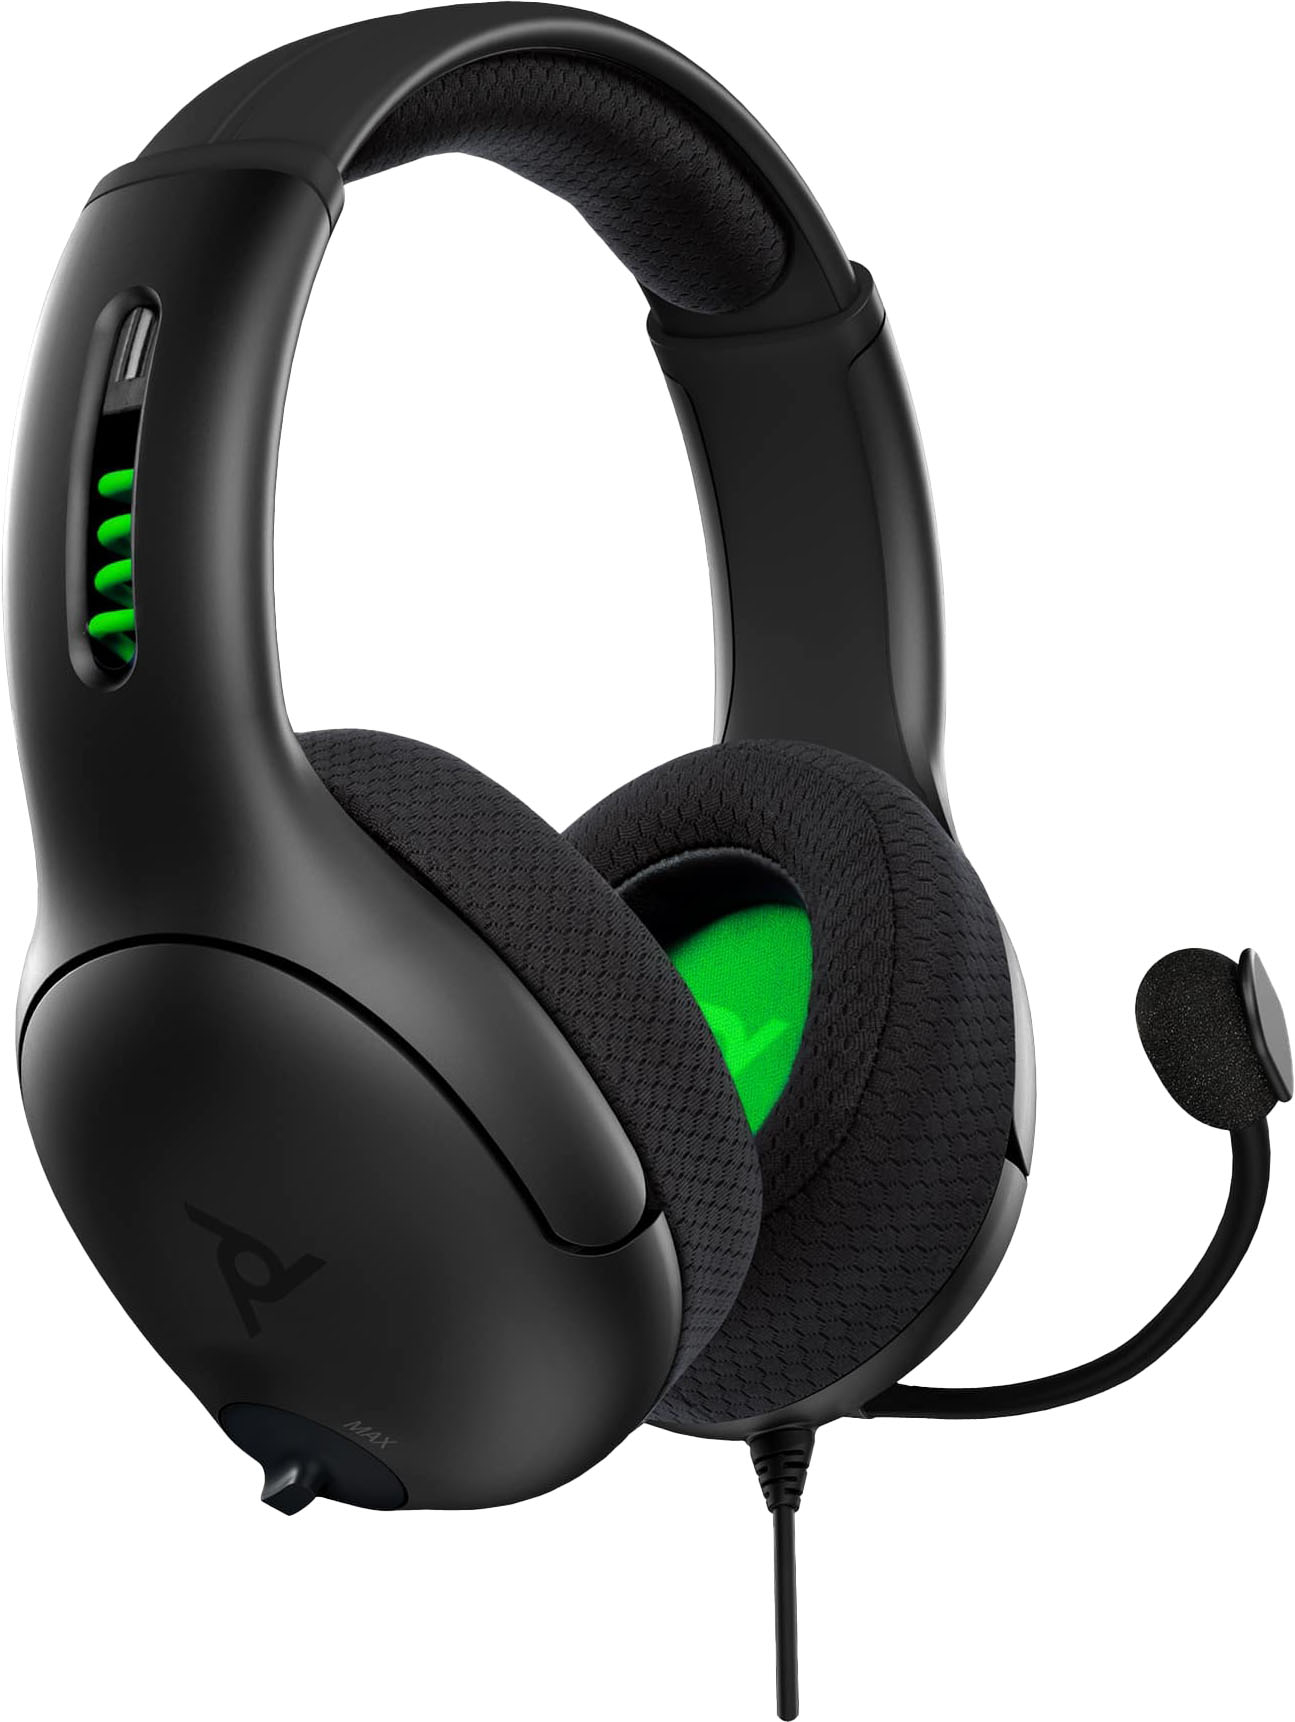 Angle View: PDP - LVL50 Wired Stereo Gaming Headset for Xbox - Black - Black